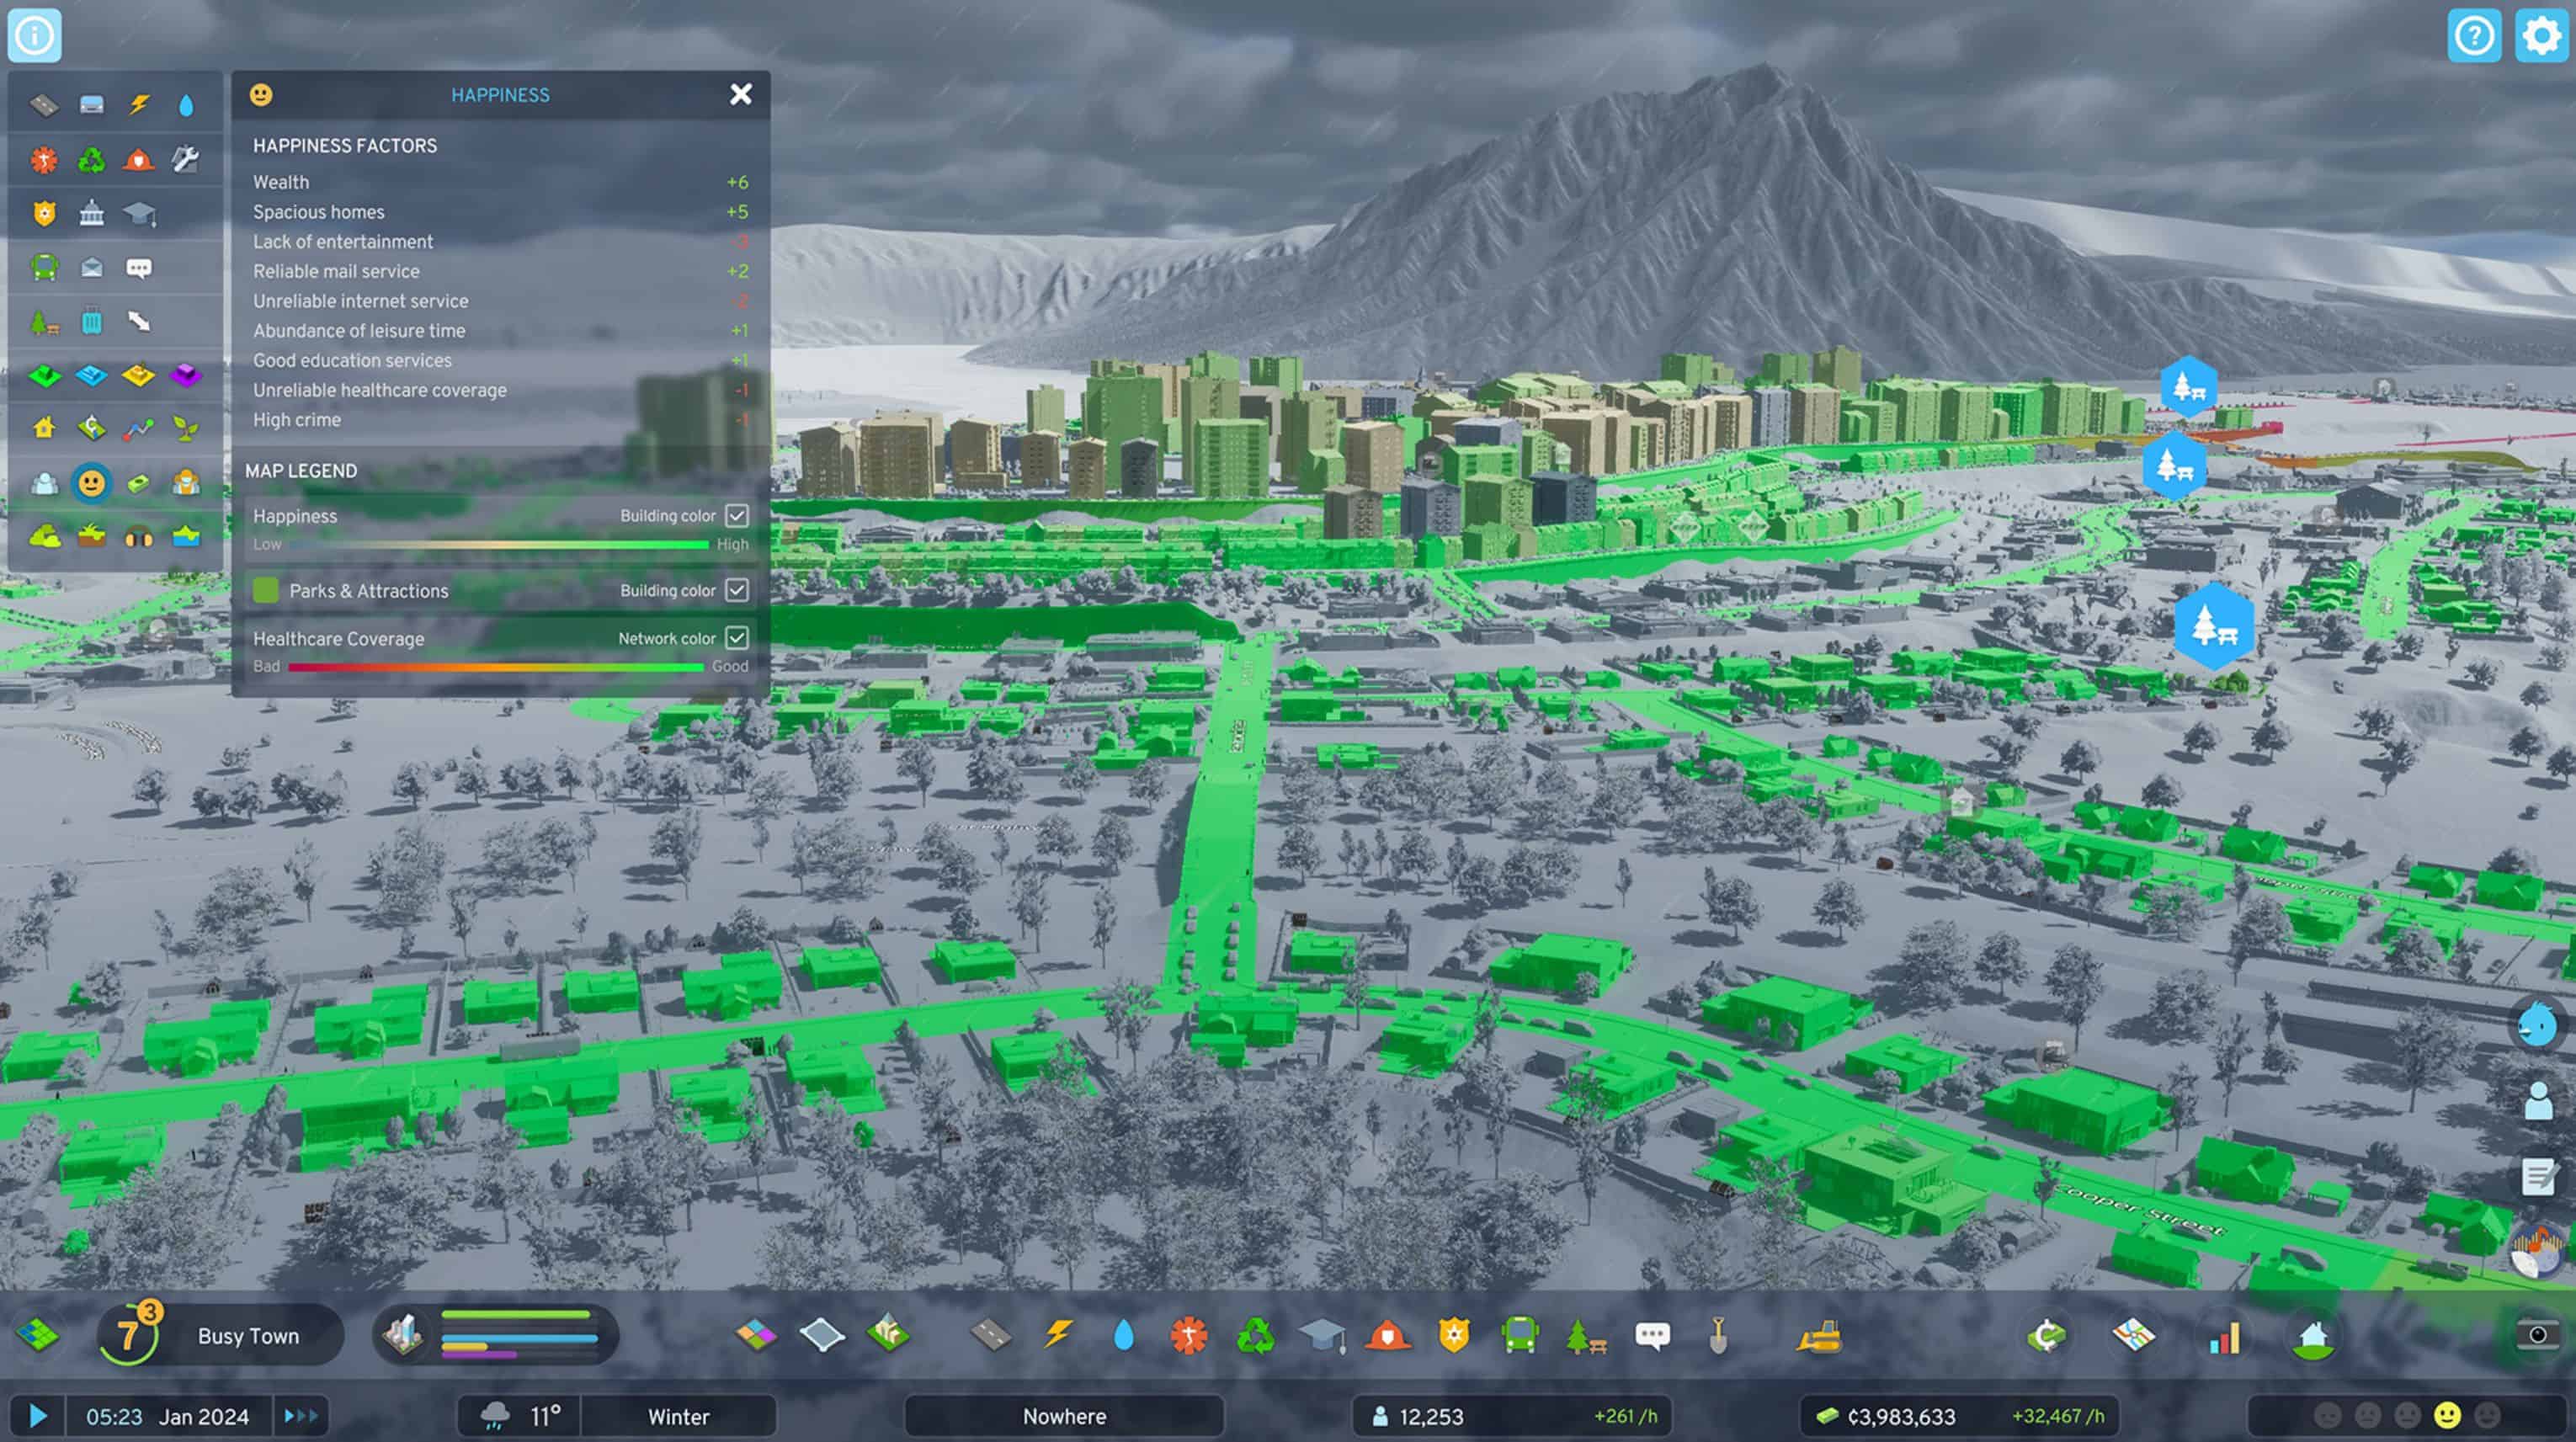 Cities Skylines 2 mod transfer and multiplayer hopes dashed, kind of